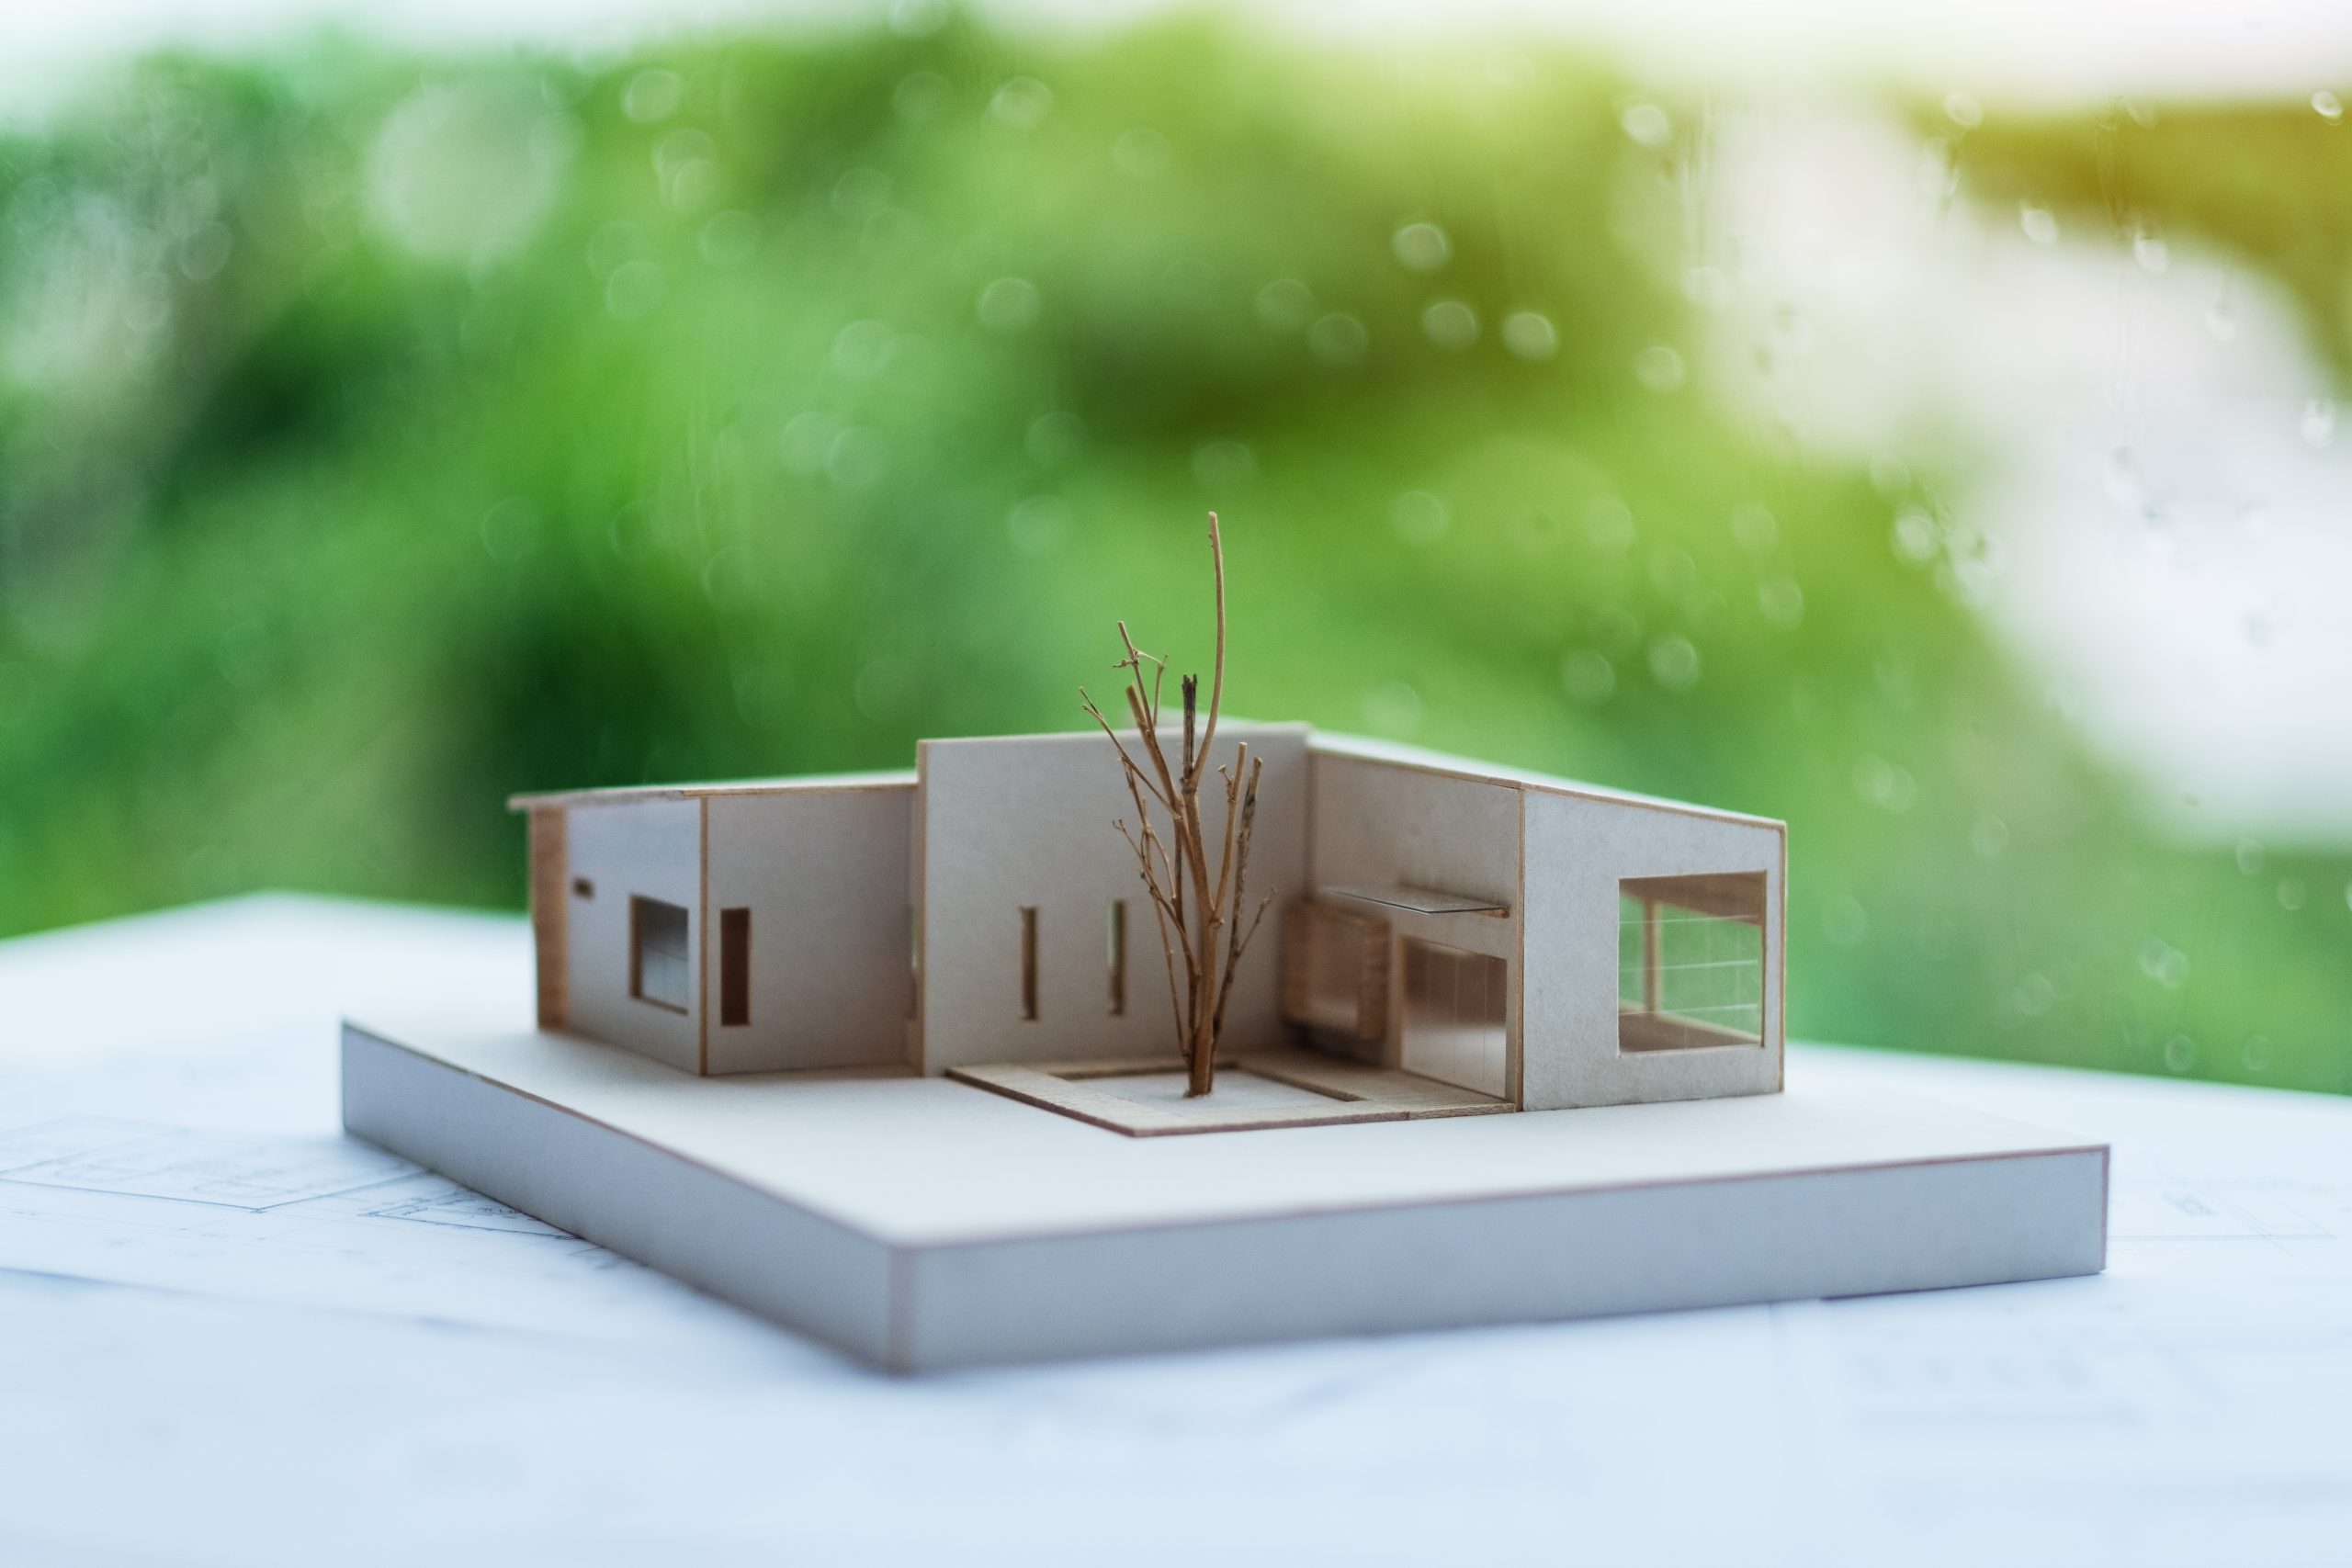 How to build your very own Diorama House Kit?